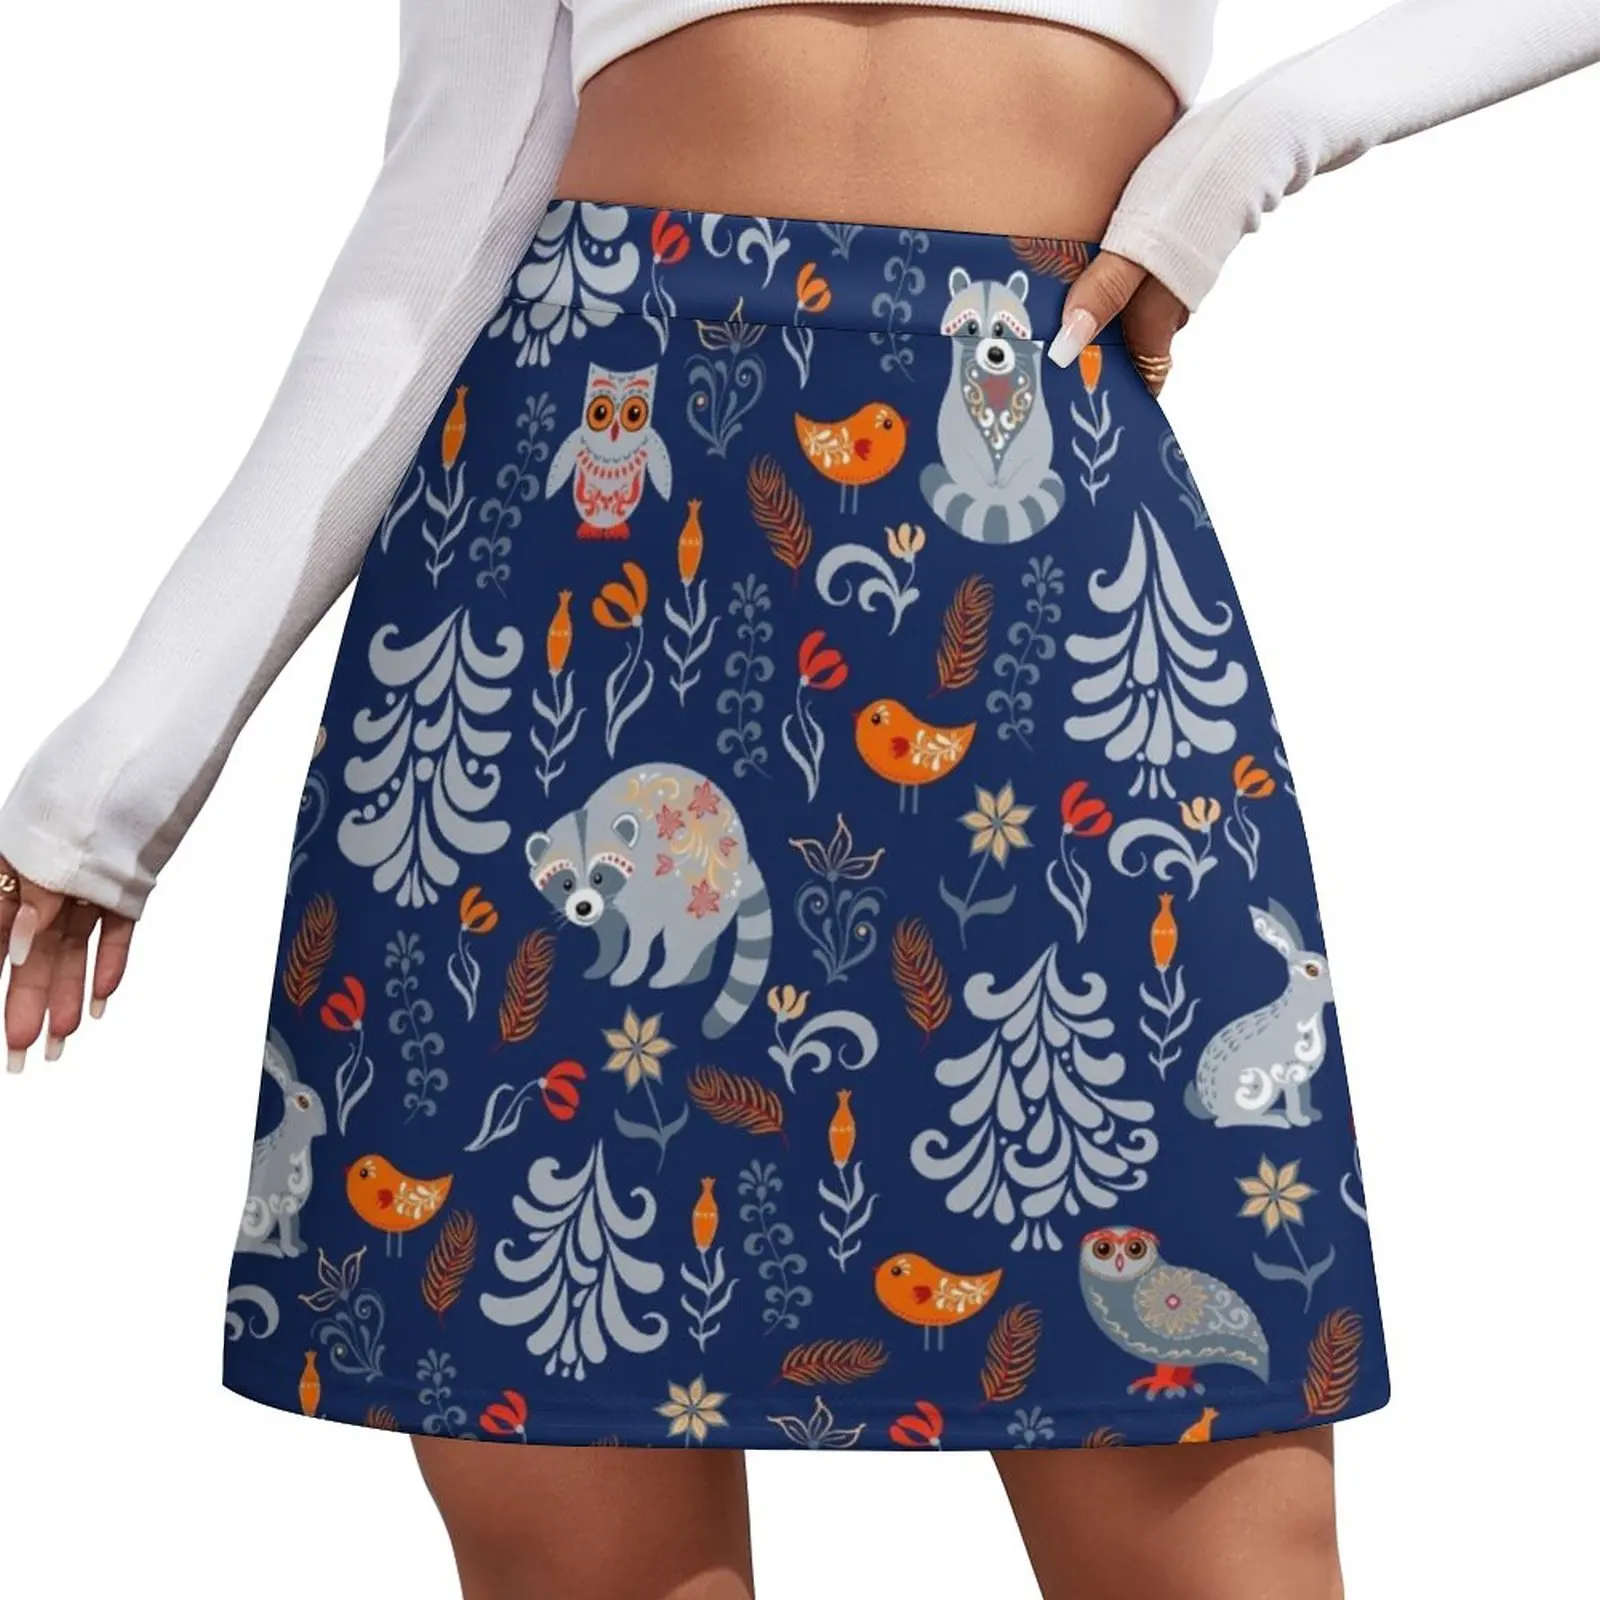 

Fairy forest with animals and birds. Raccoons, owls, bunnies and little chick. Mini Skirt Women's summer skirt Woman clothing